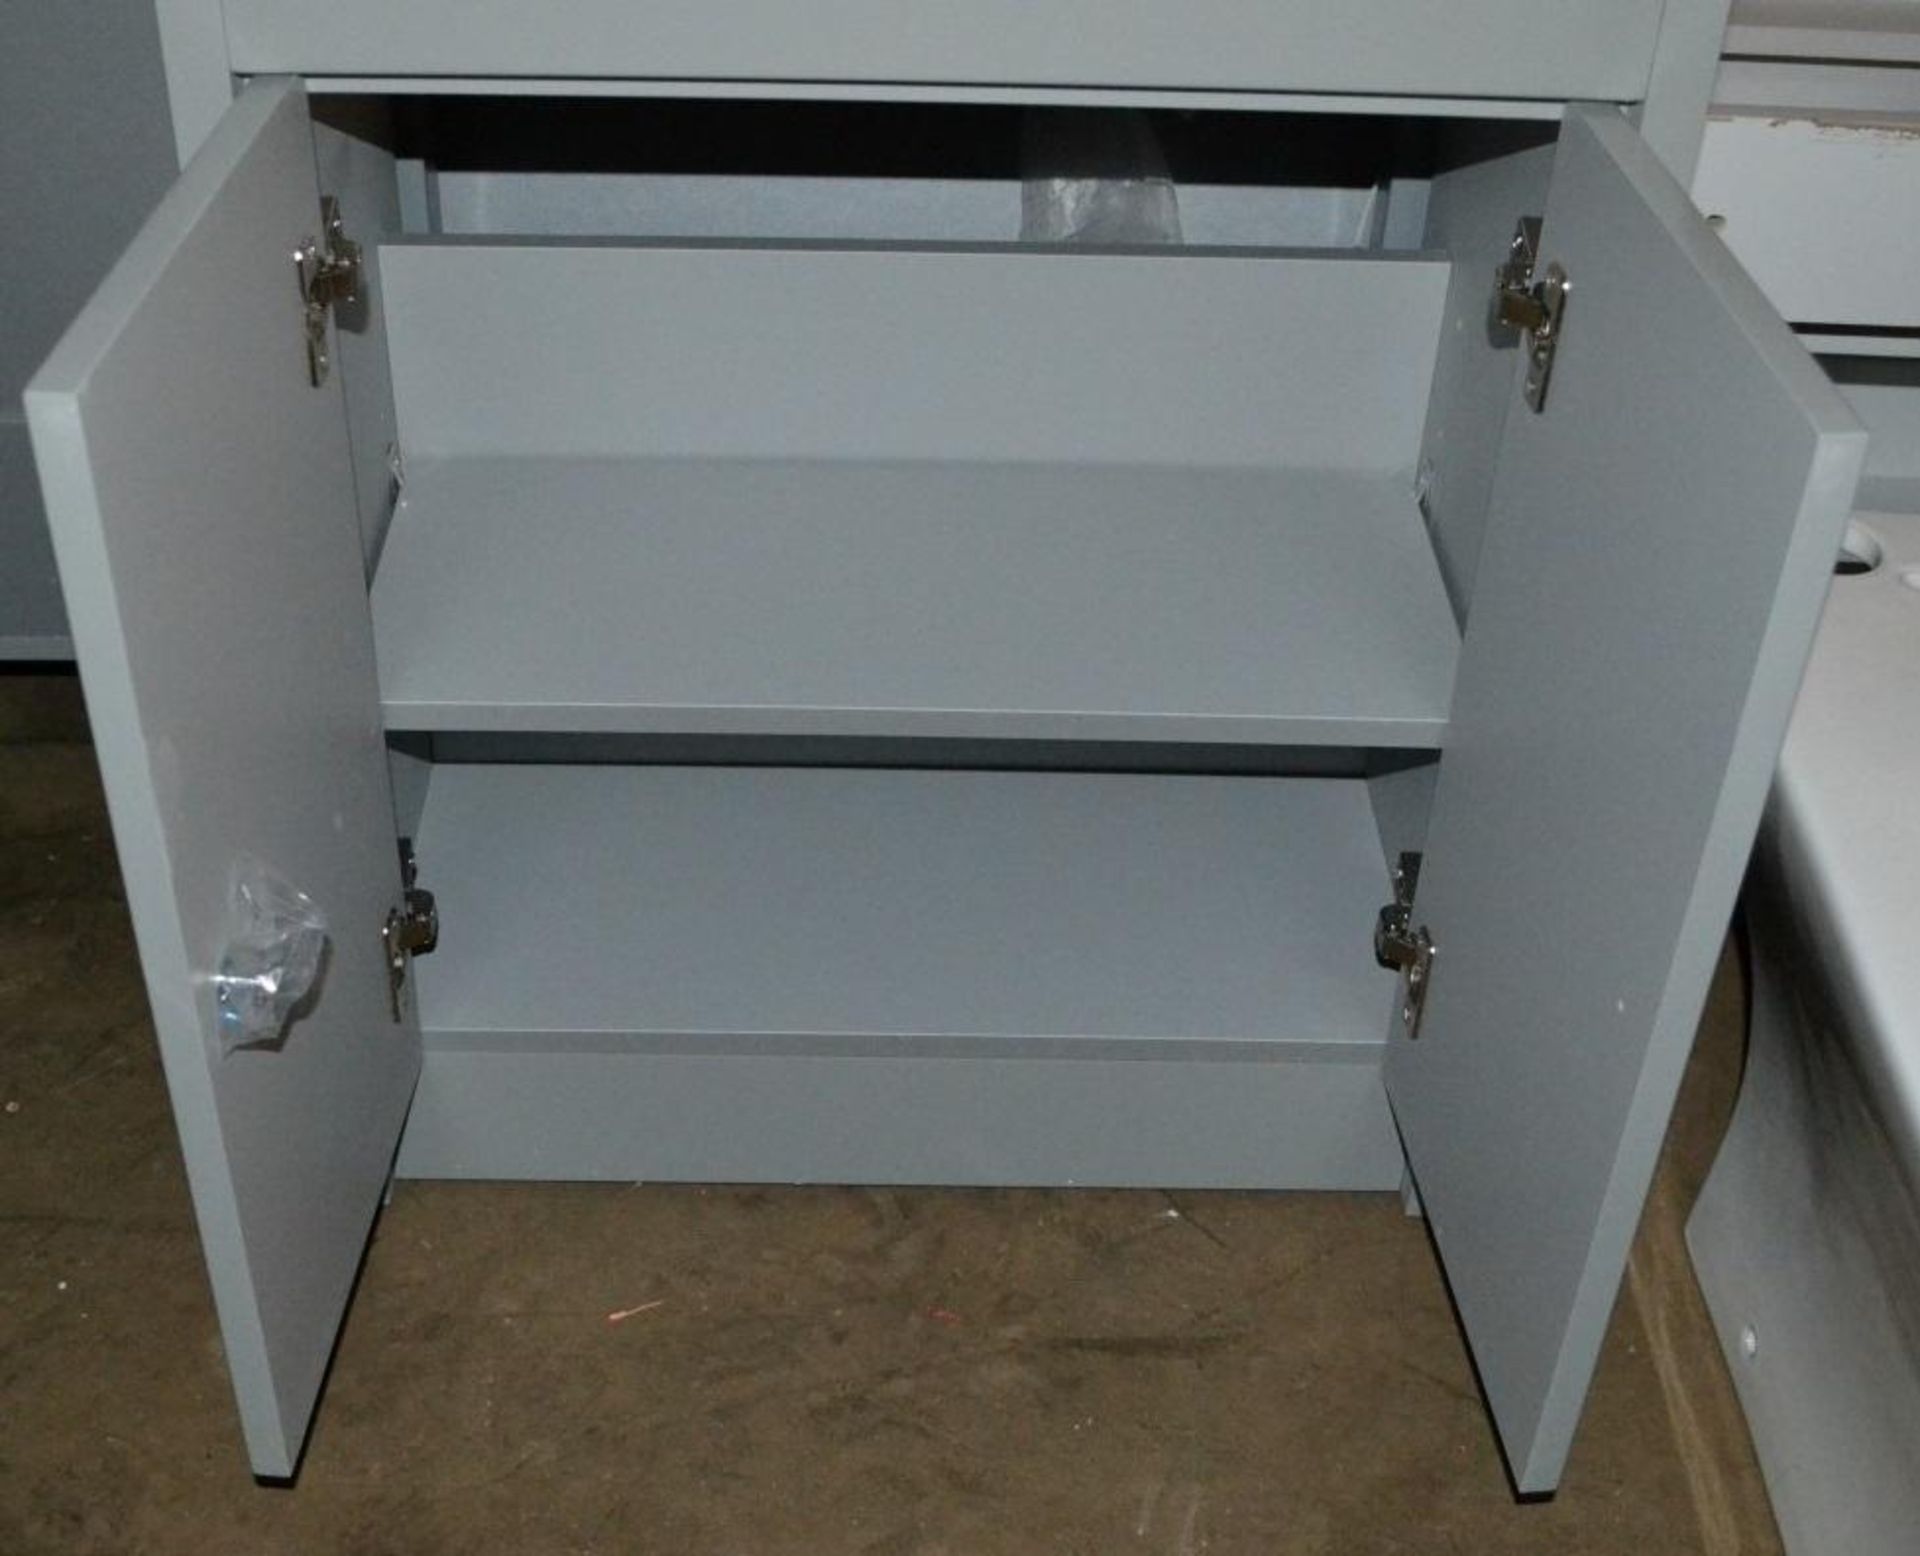 1 x Square Vanity Sink Unit With Shelf - Ex-Display Item - Ref MT884 - CL269 - Location: Bolton - Image 3 of 5